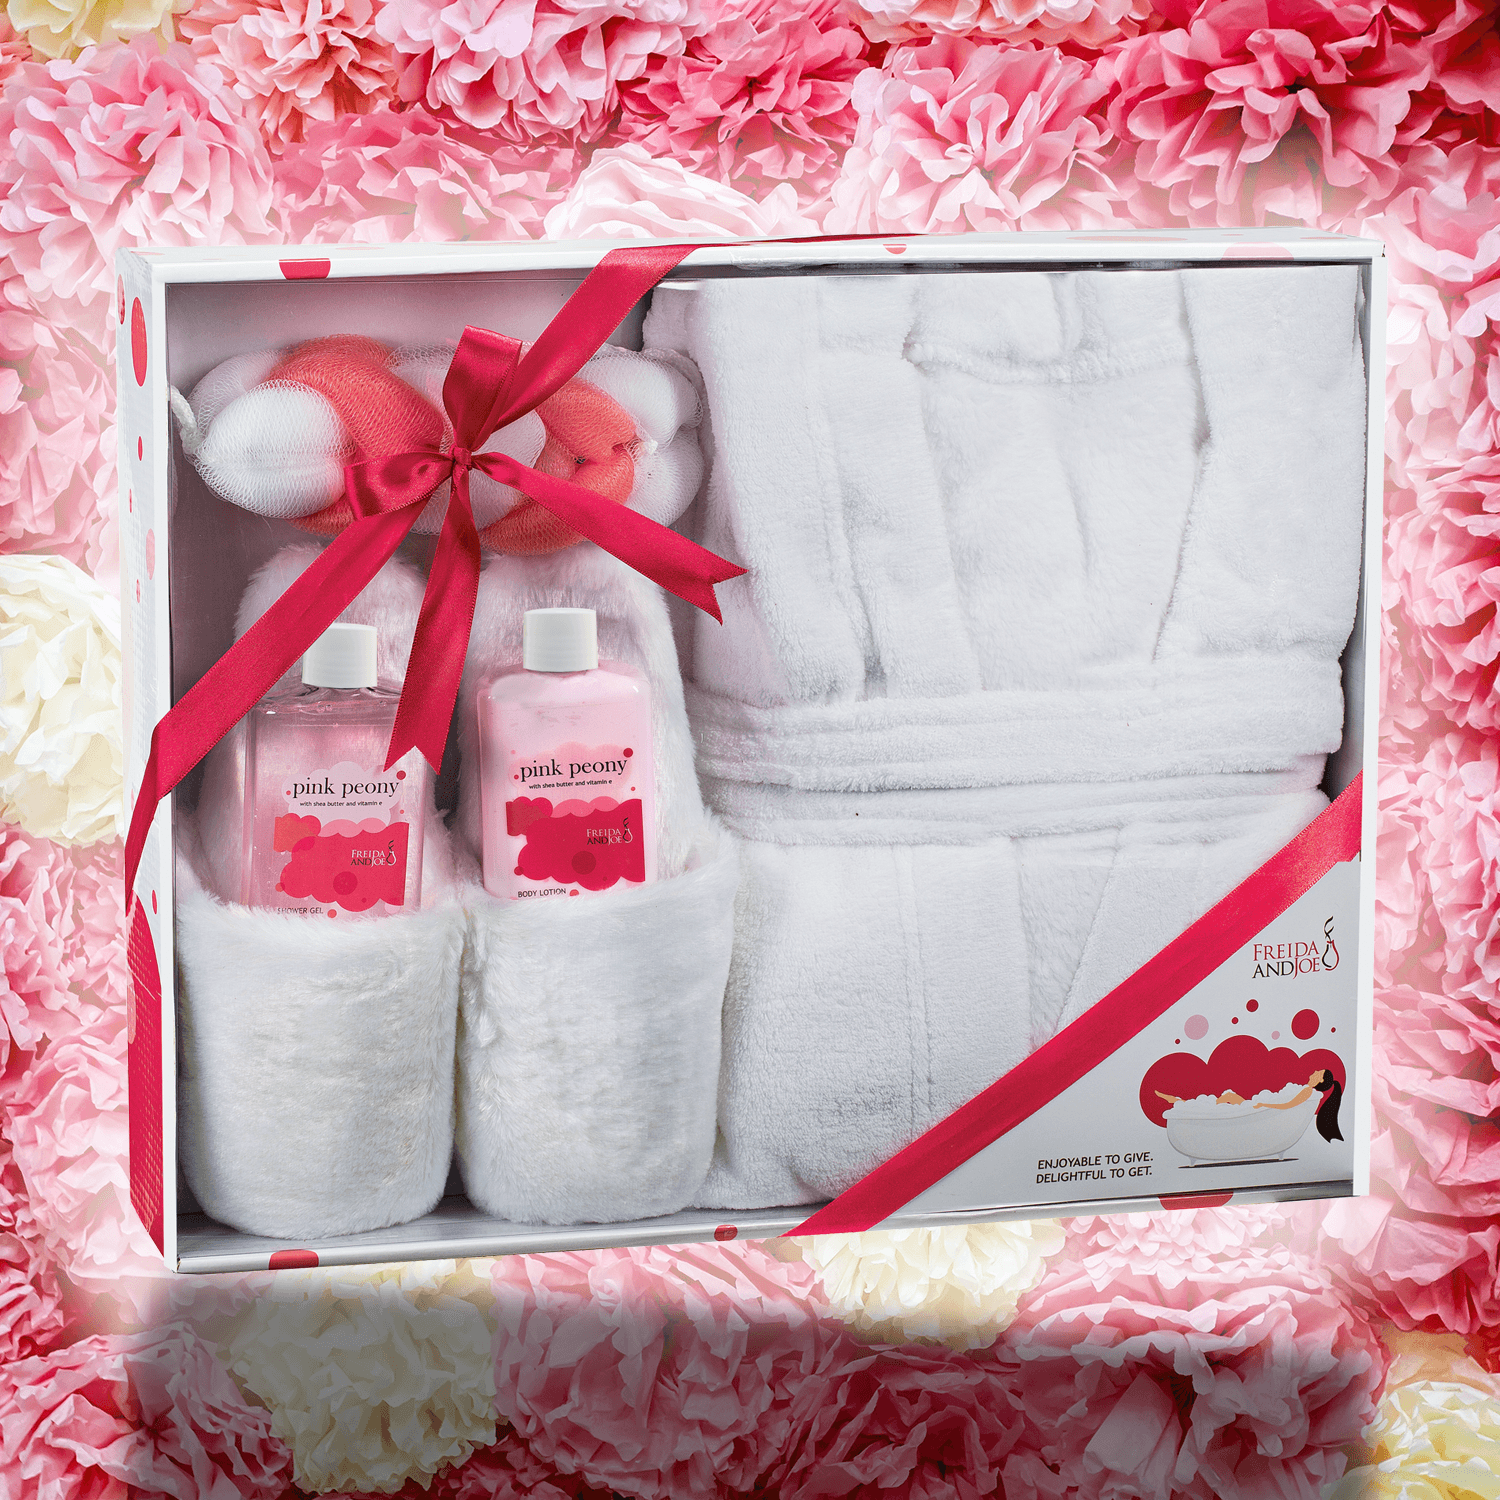 Freida & Joe Gift for Her Pink Peony Scent Home Spa Gift Basket with Luxury Bathrobe & Slipper for Women - image 5 of 5